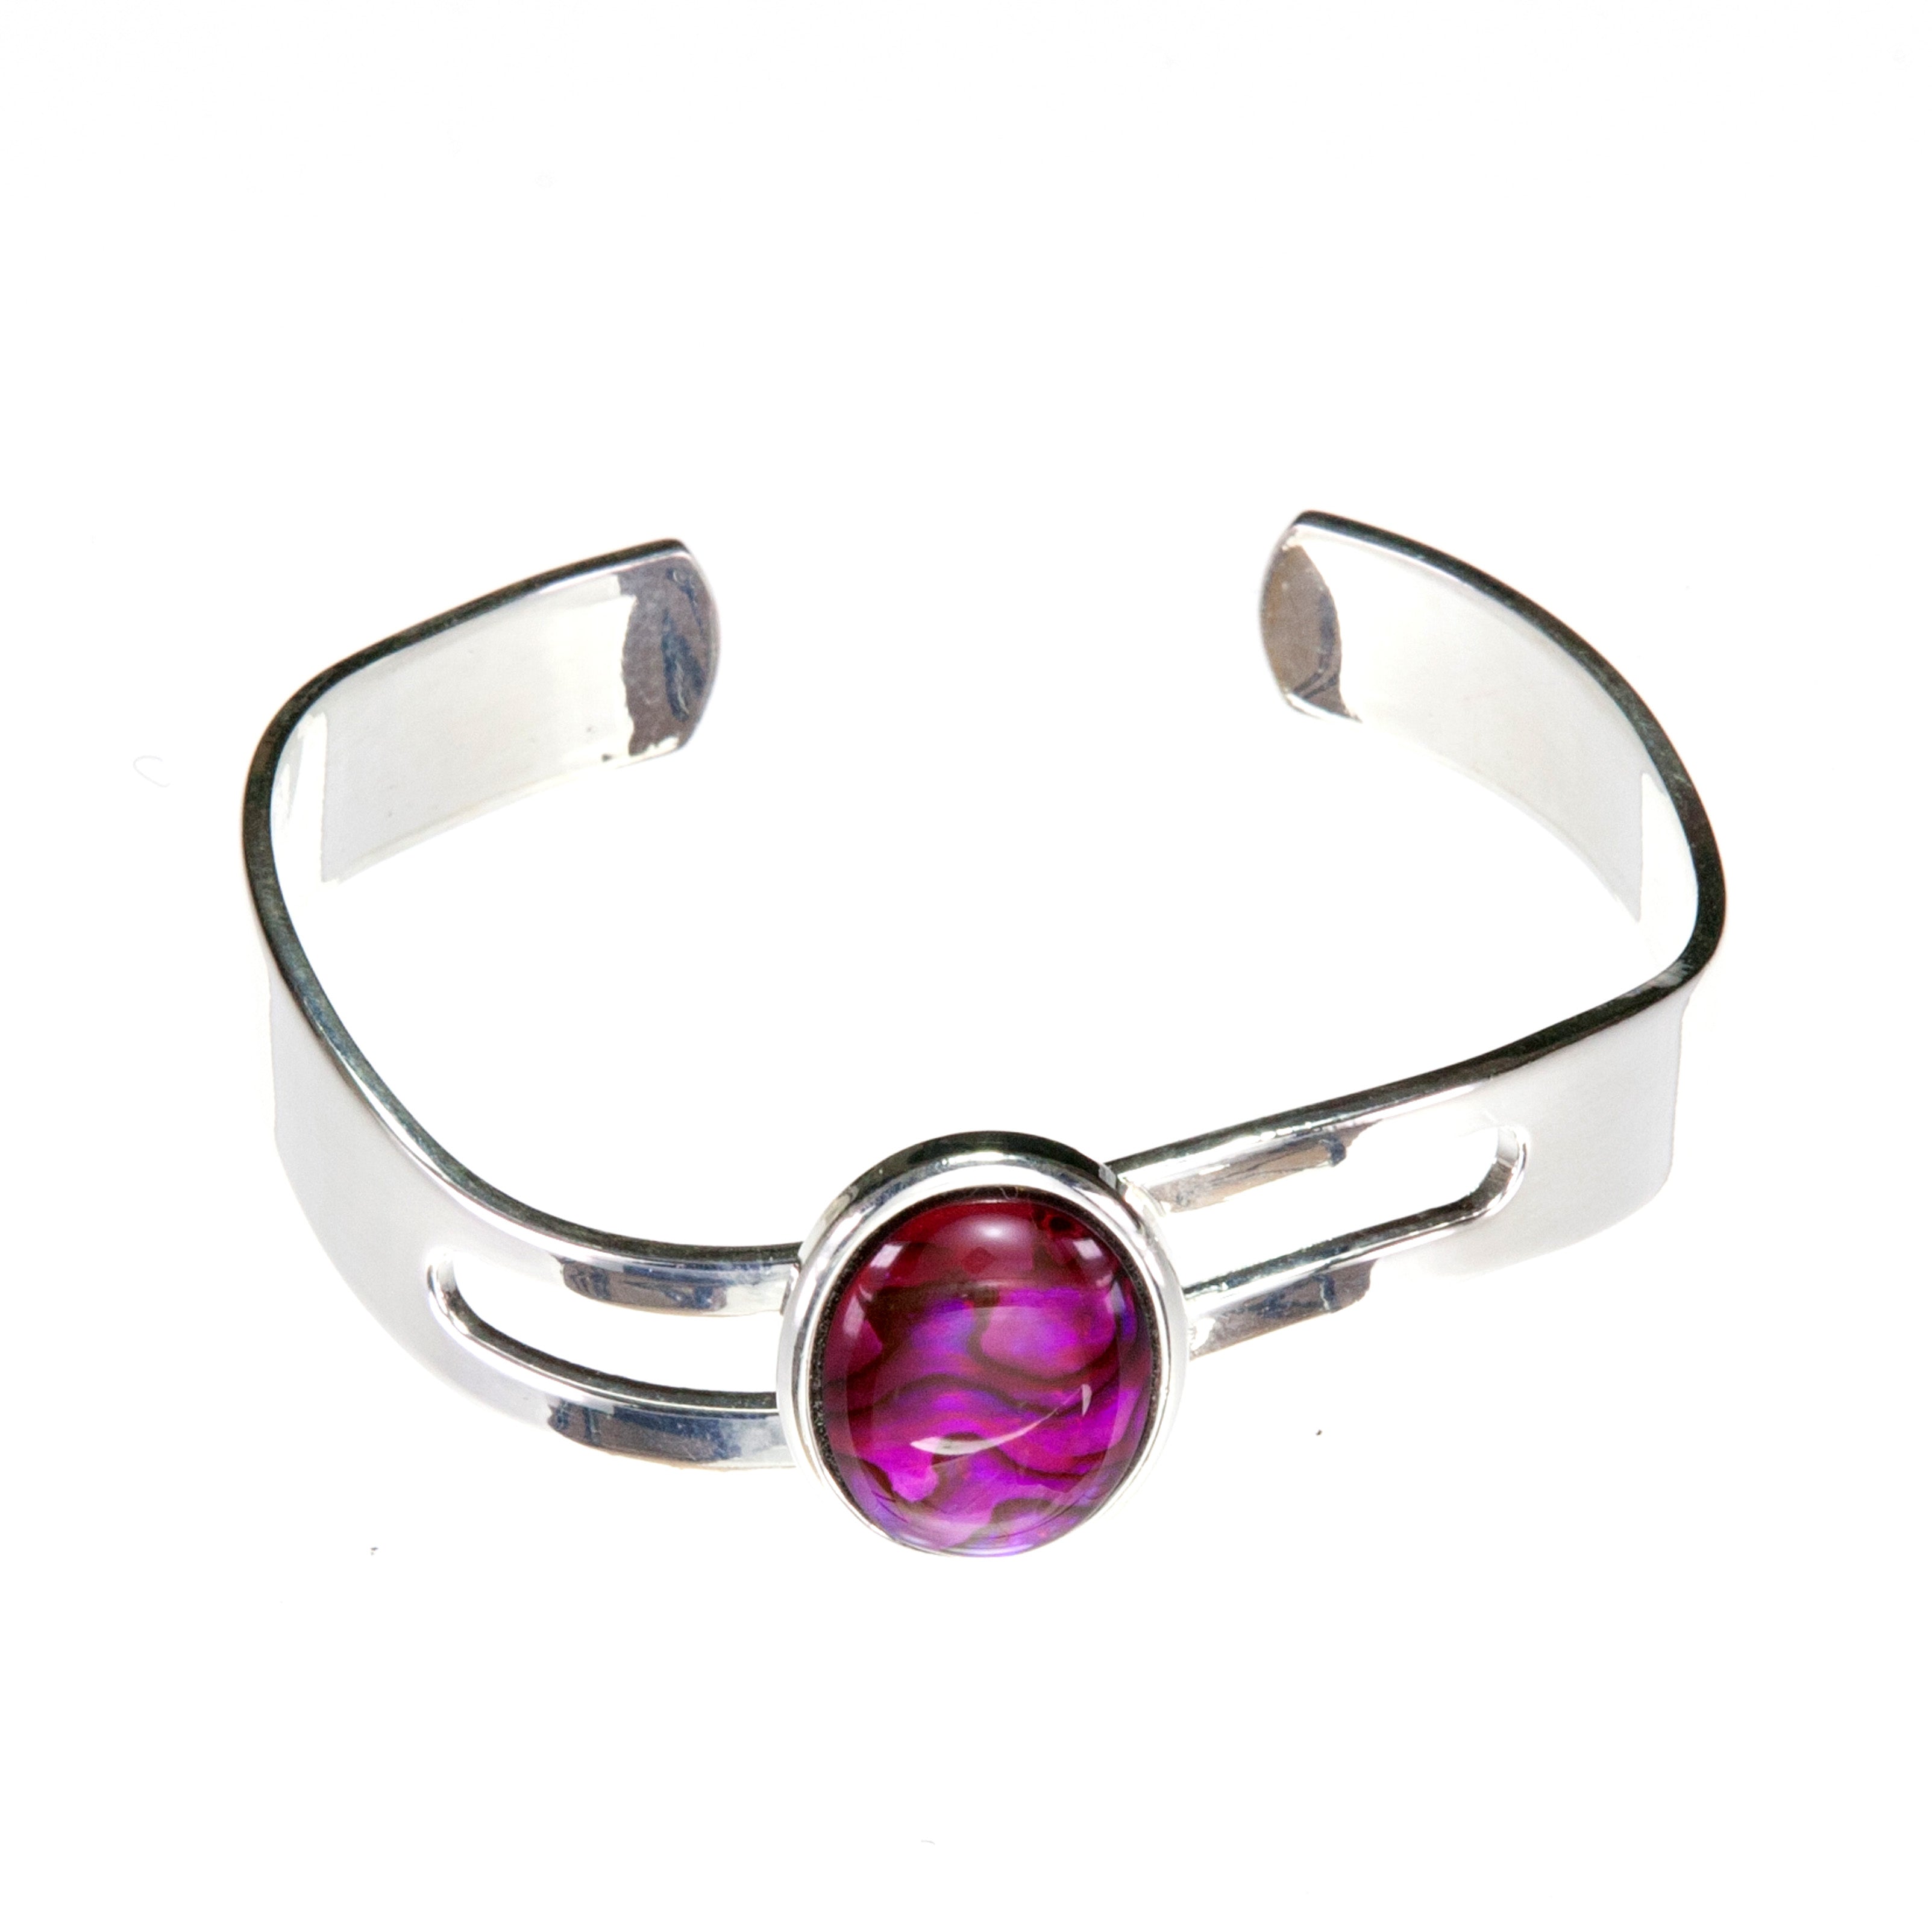 Adjustable Bangle with Large Bright Pink Abalone Cabochon and Silver Plated Wave Shaped Cuff